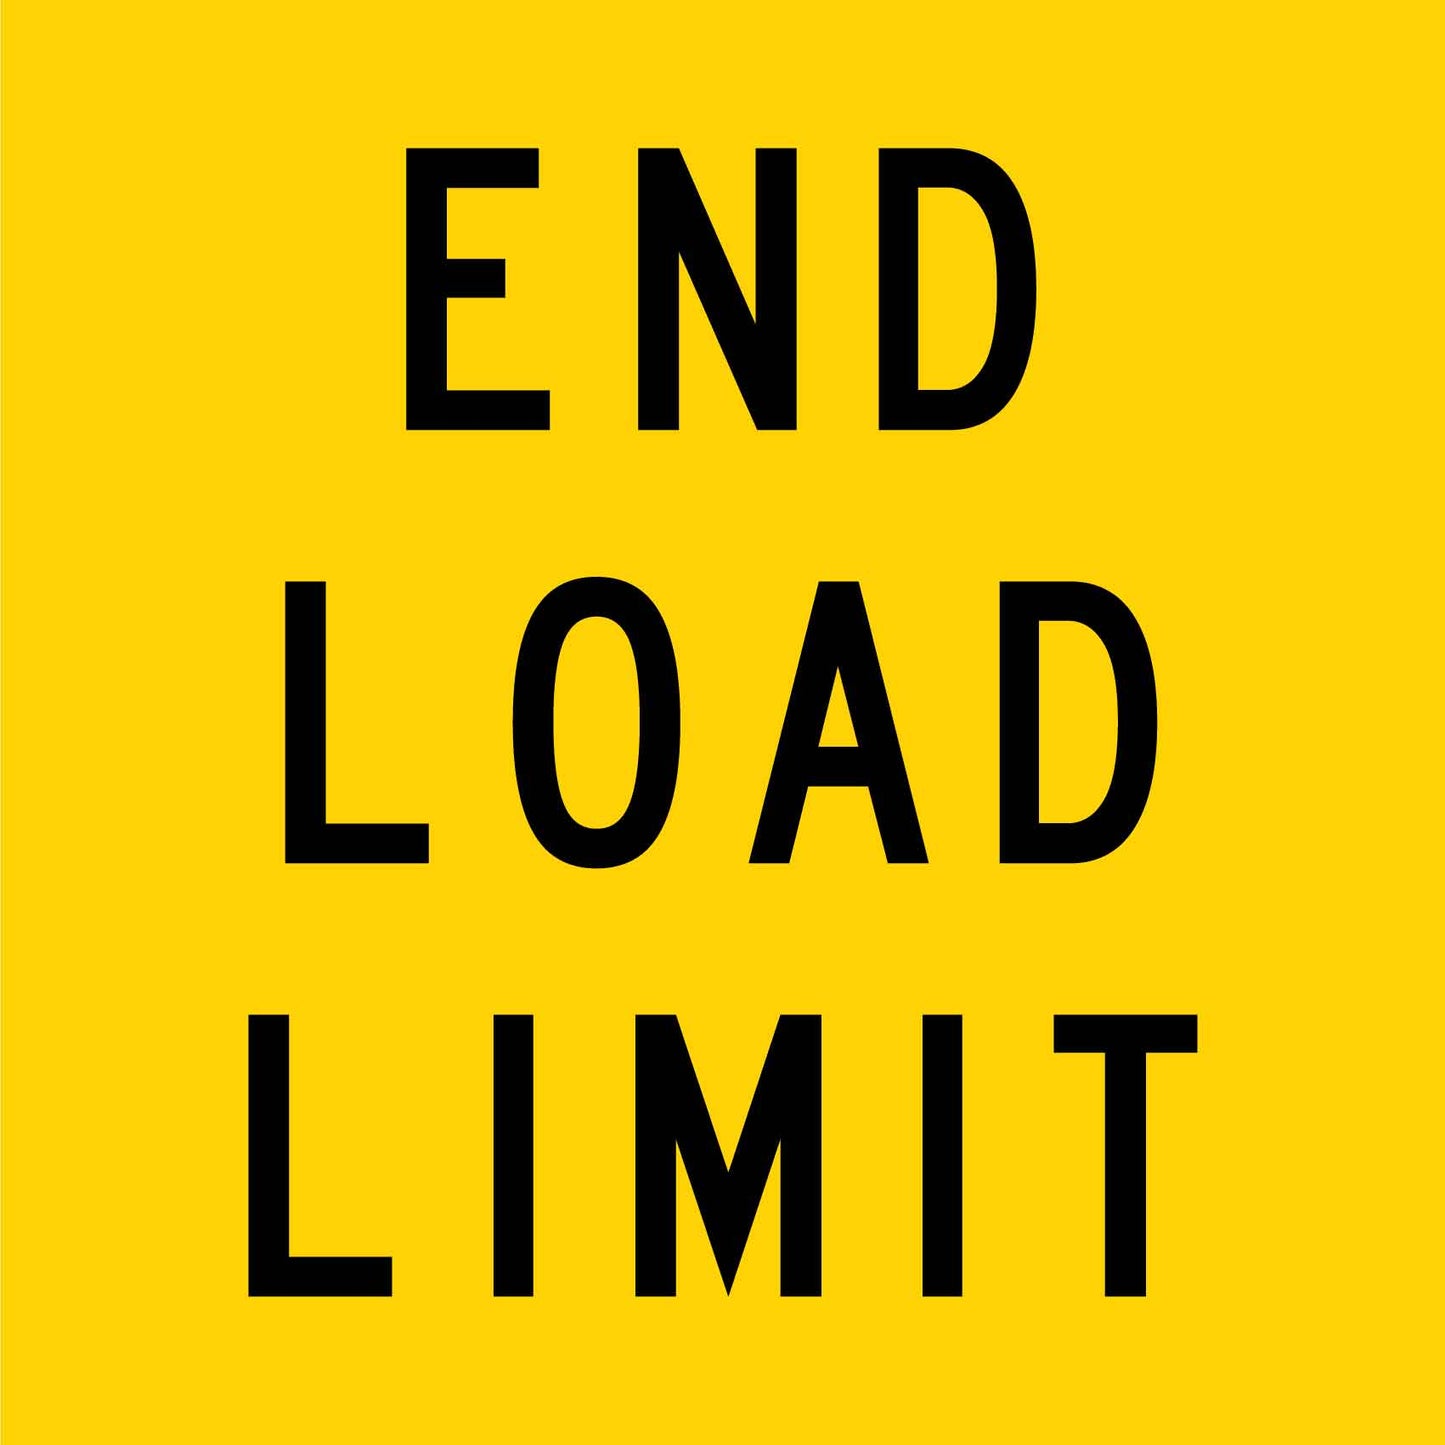 End Load Limit Multi Message Reflective Traffic Sign